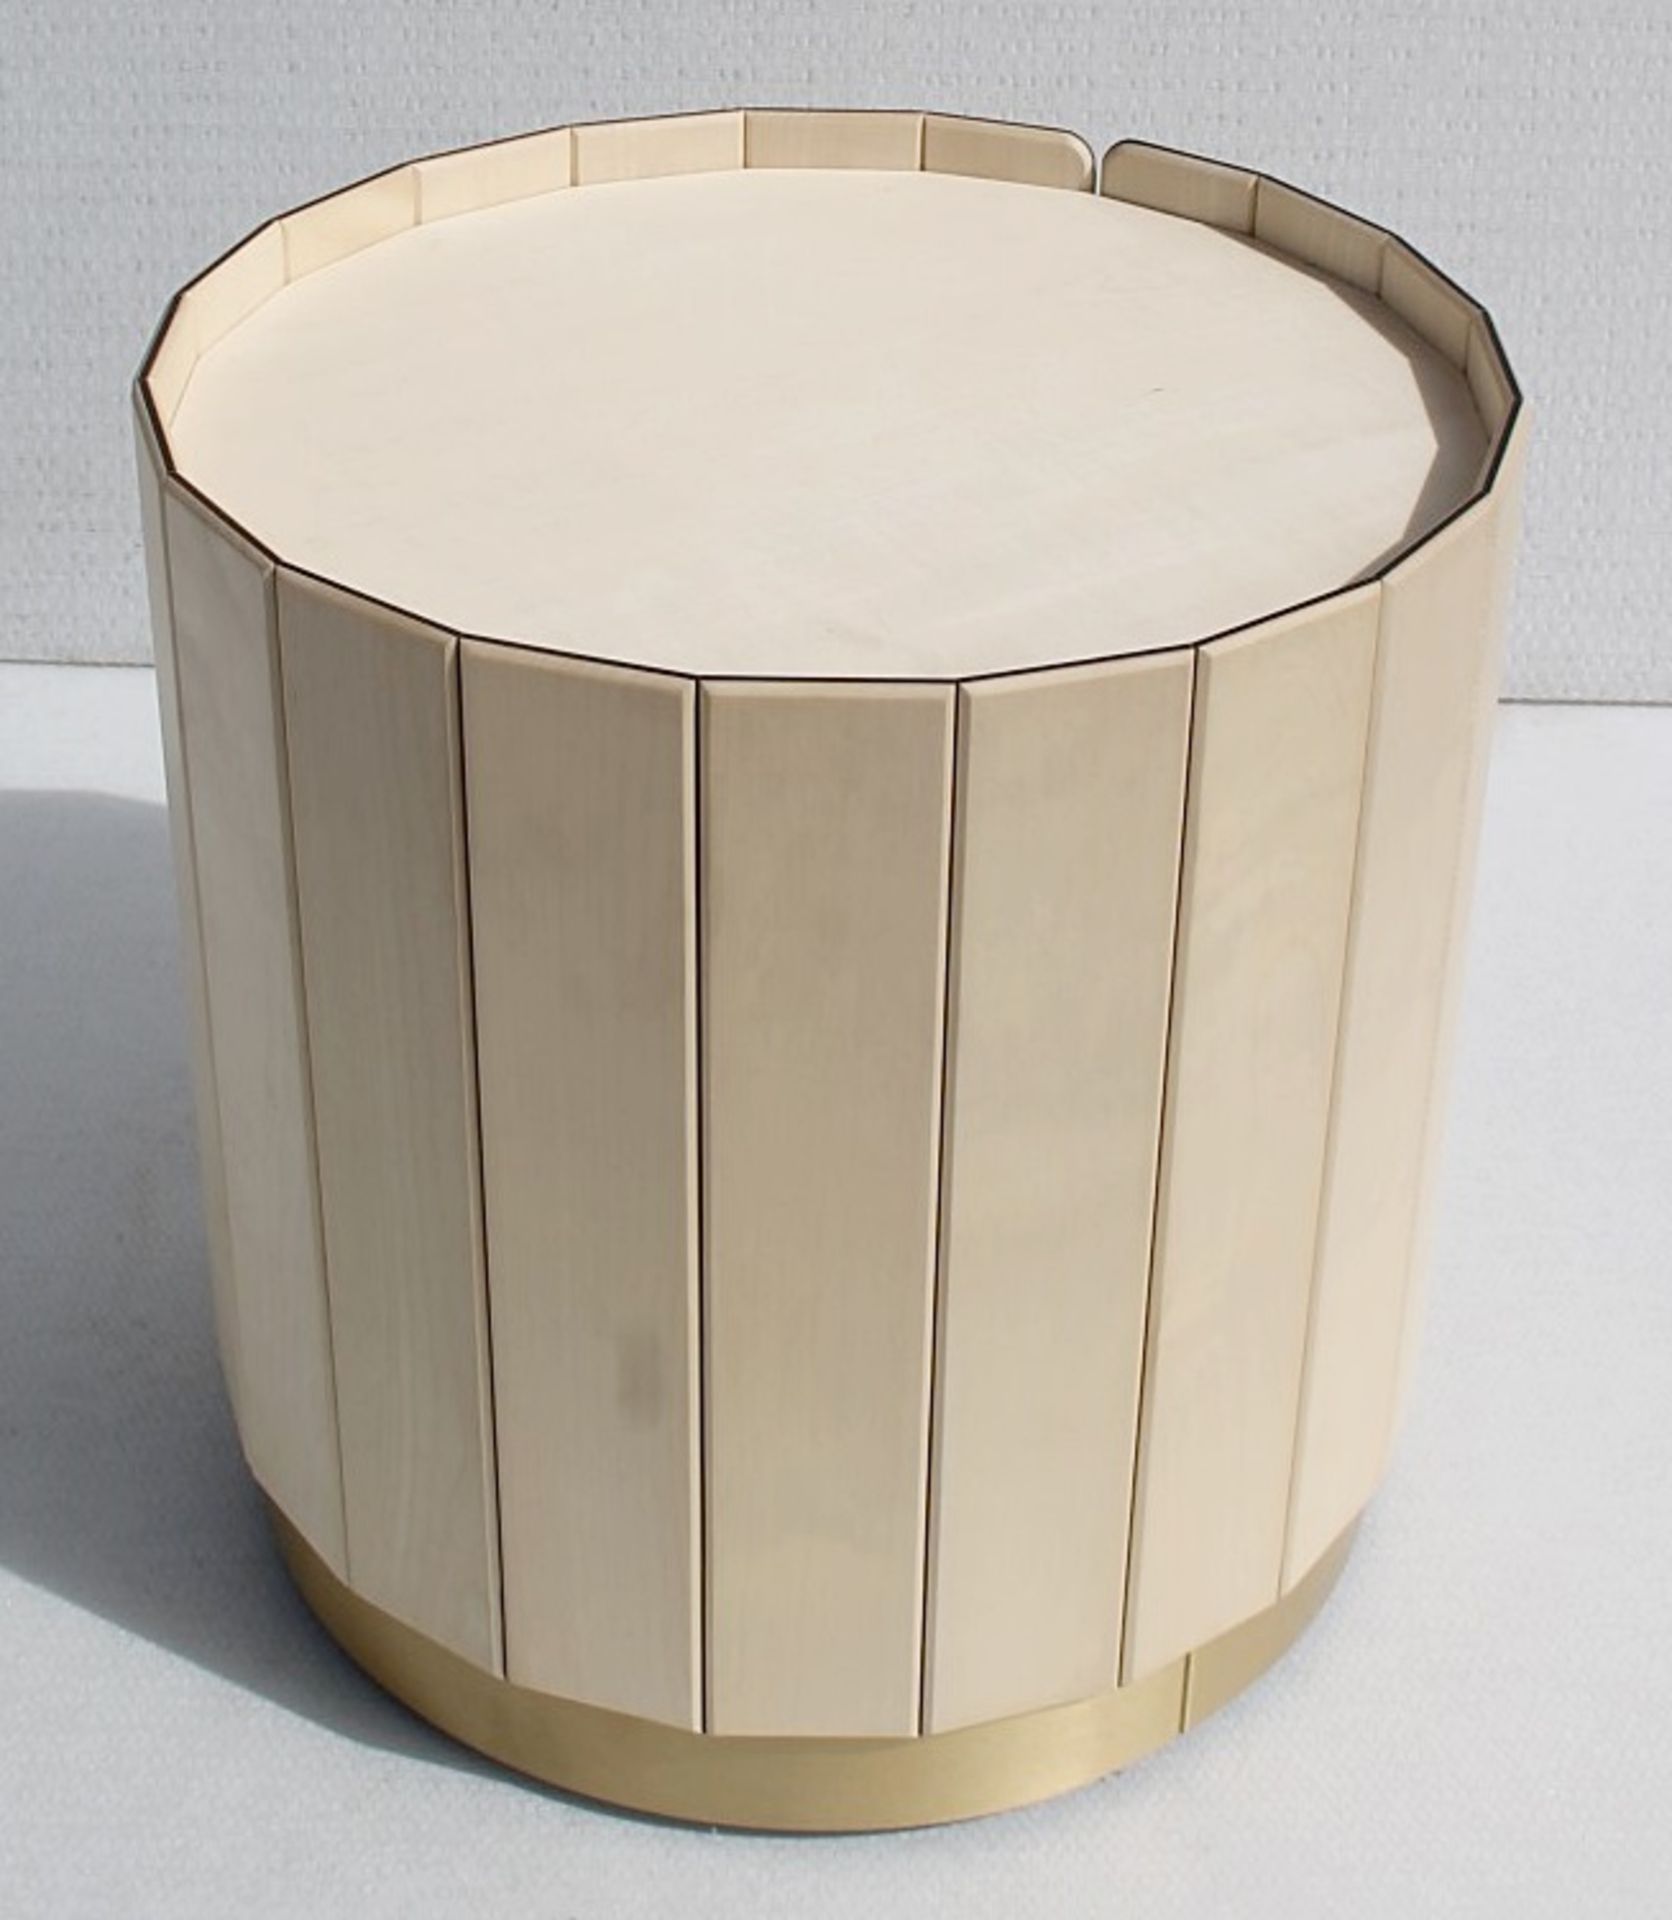 1 x BAXTER 'Ninfea' Italian Designer Solid Maple Bedside Table With Storage - Original Price £2,399 - Image 7 of 7